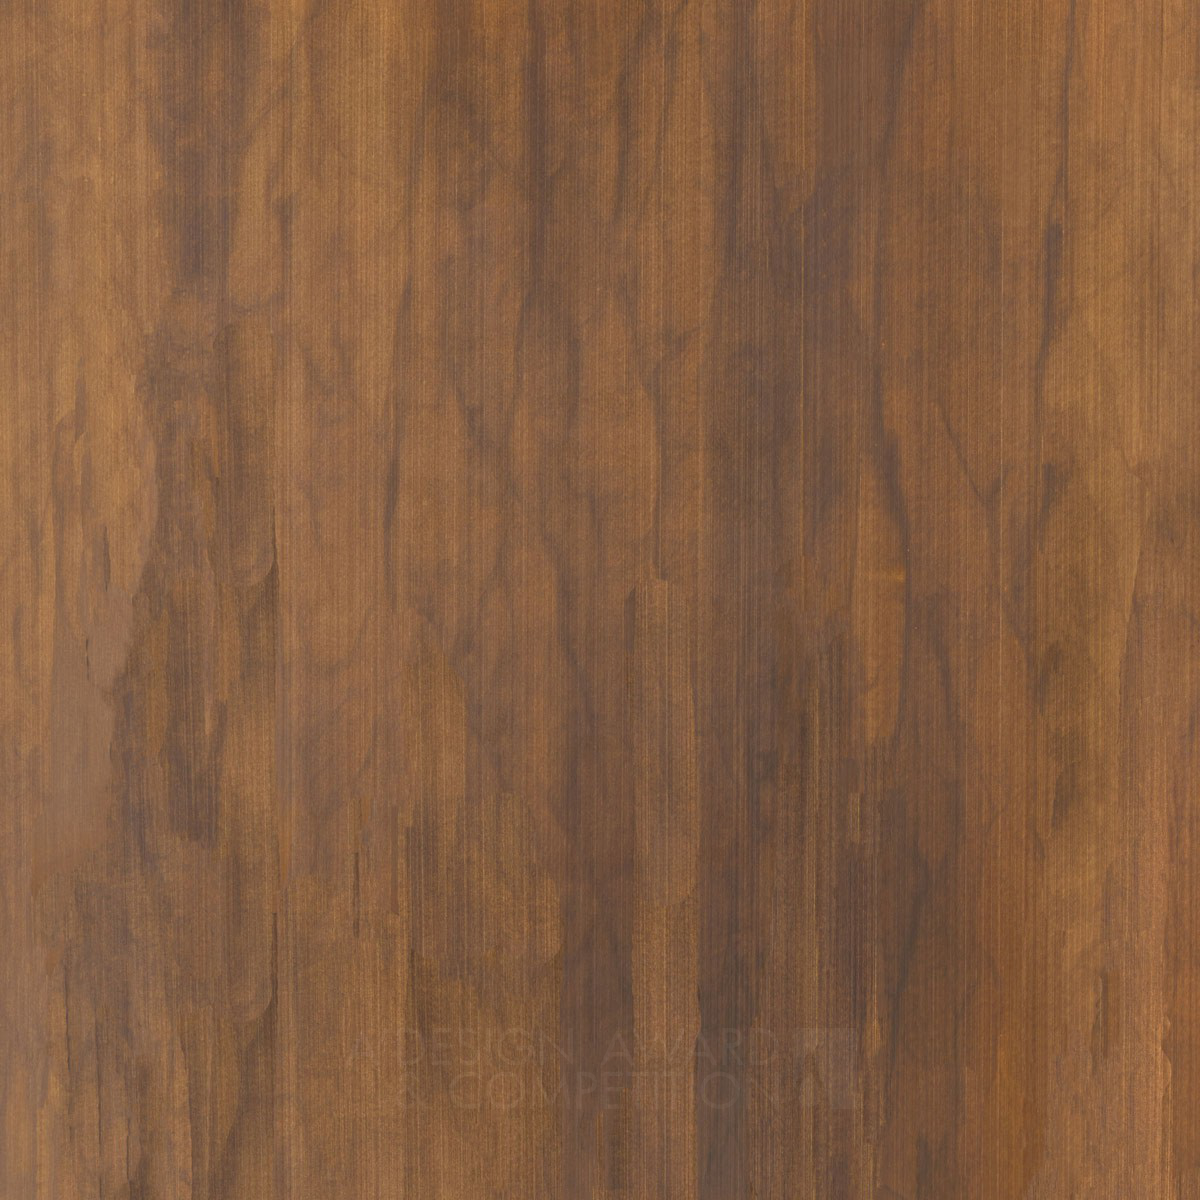 DecoMetal® Laminate in Oxibronze  Surfacing Material  by Formica Corporation